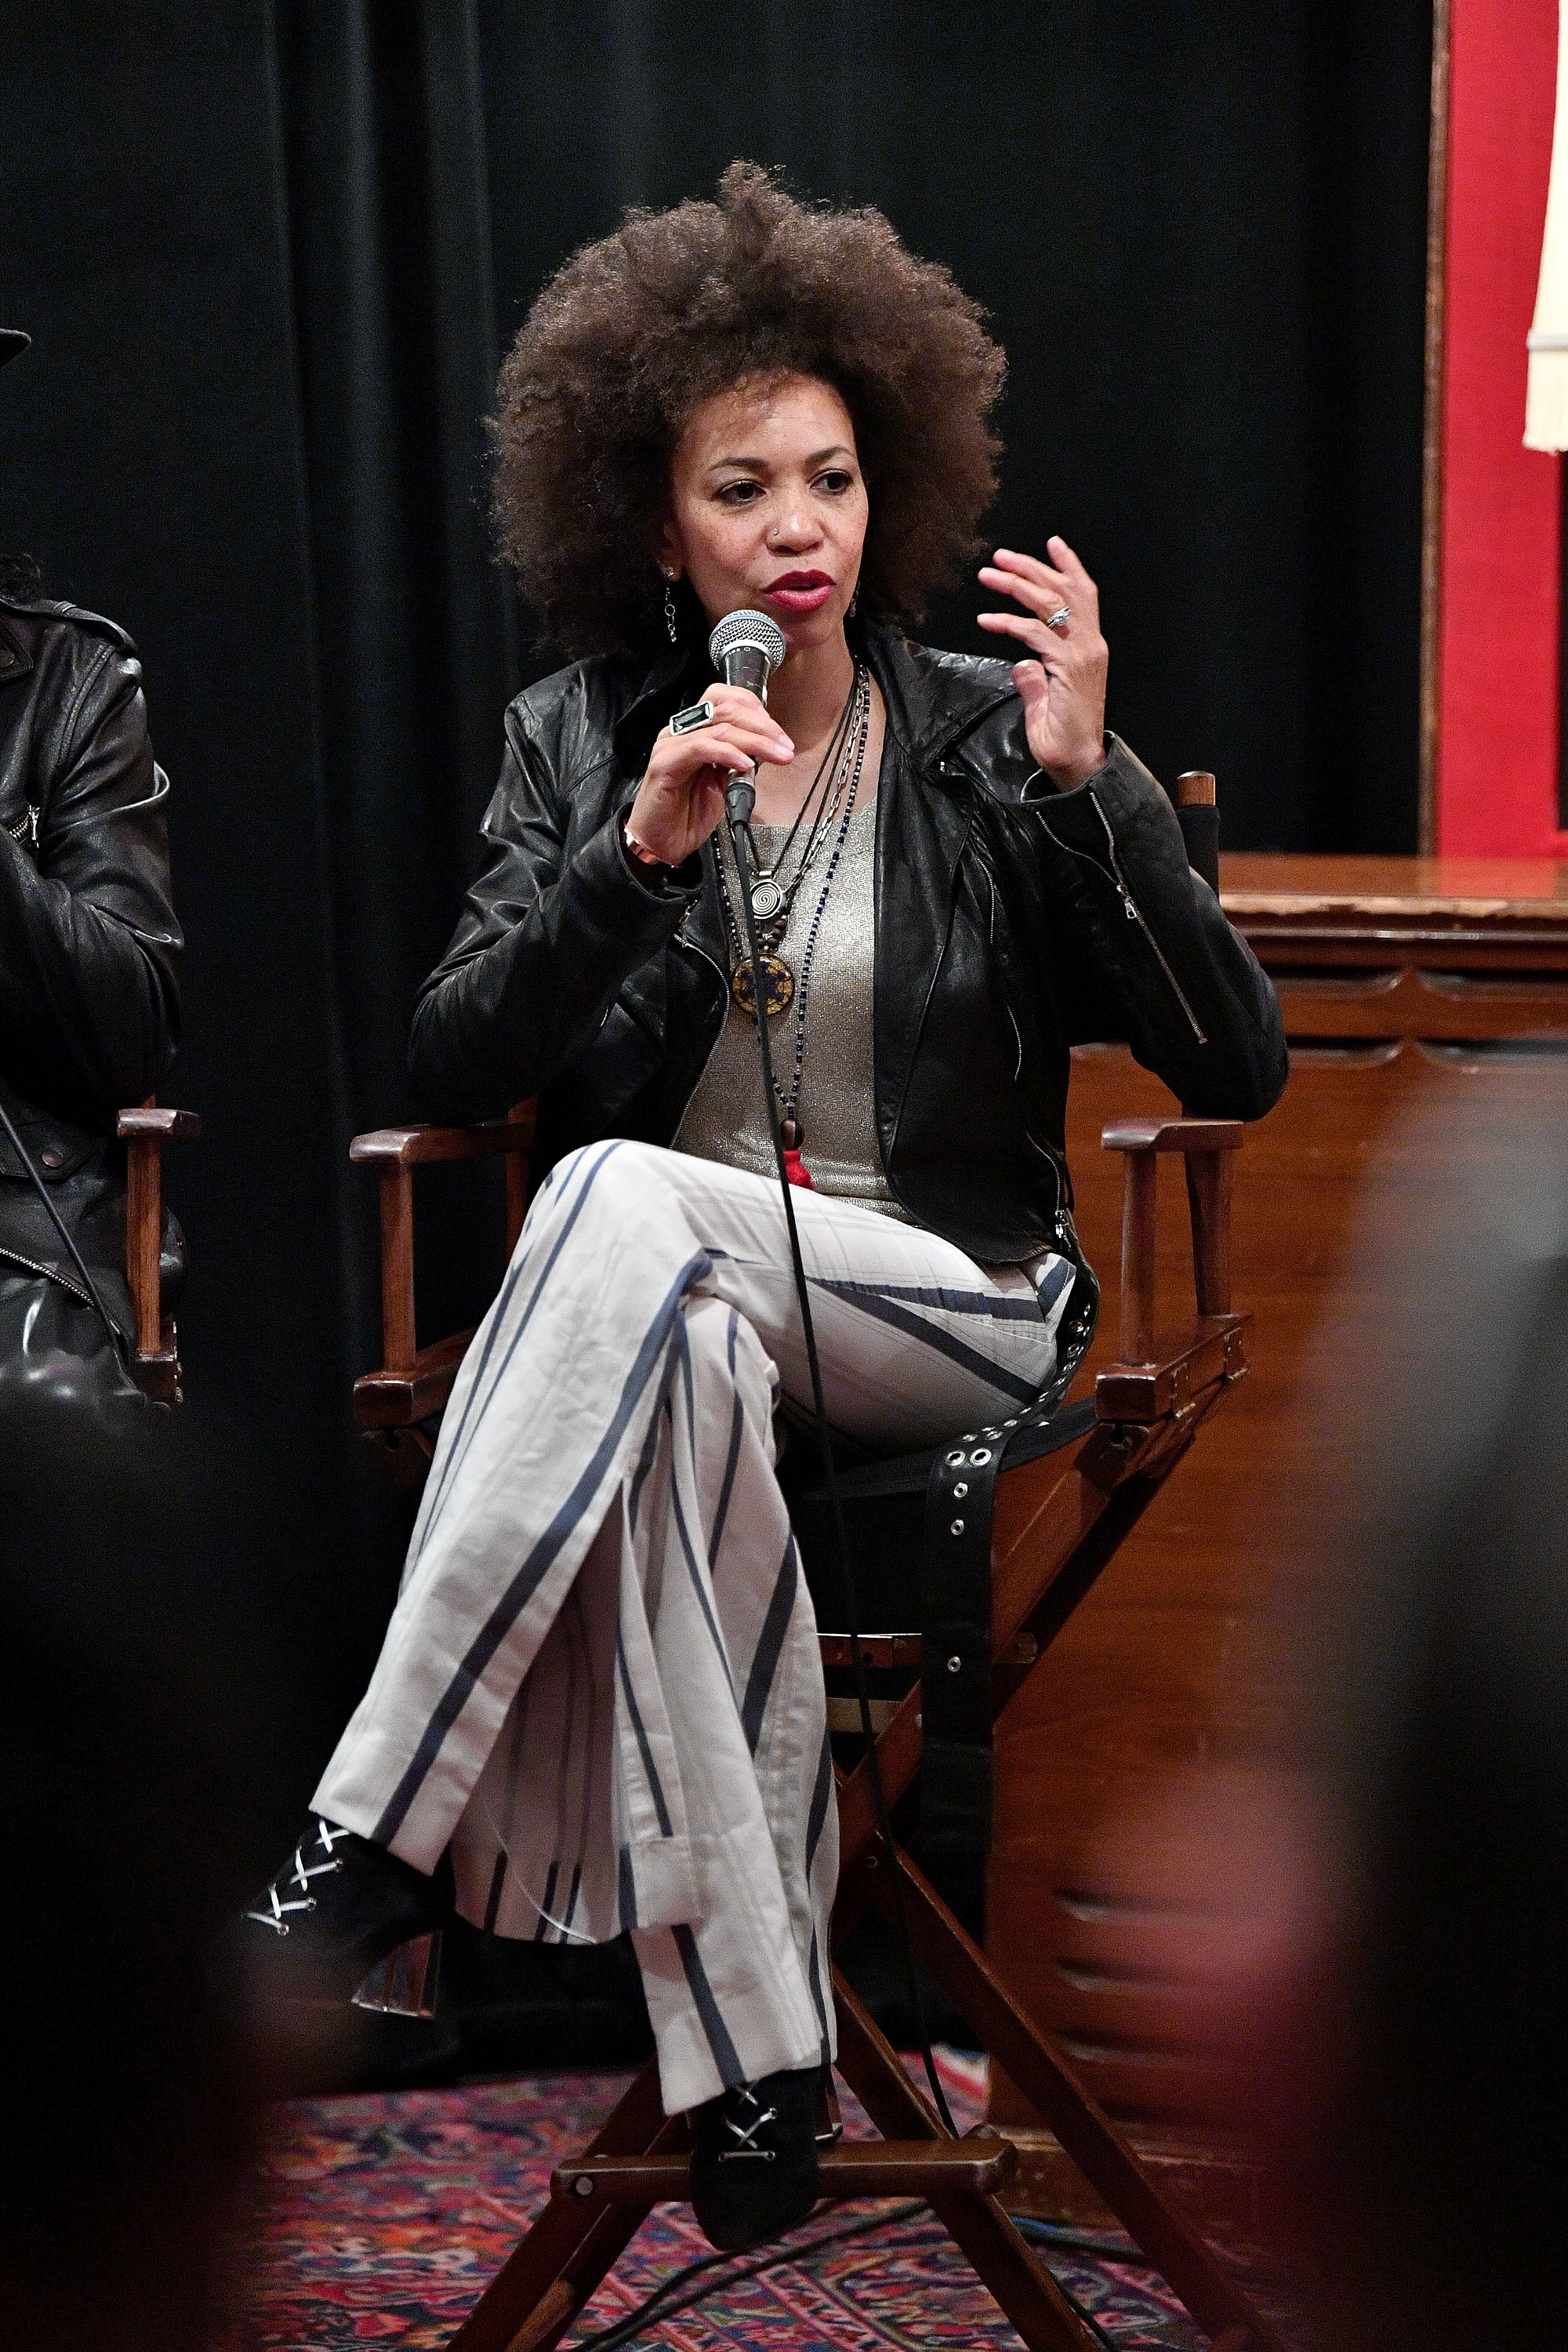 Cindy Blackman Santana at the Santana and The Isley Brothers Media Event on August 1, 2017 in New York.  | Source: Getty Images